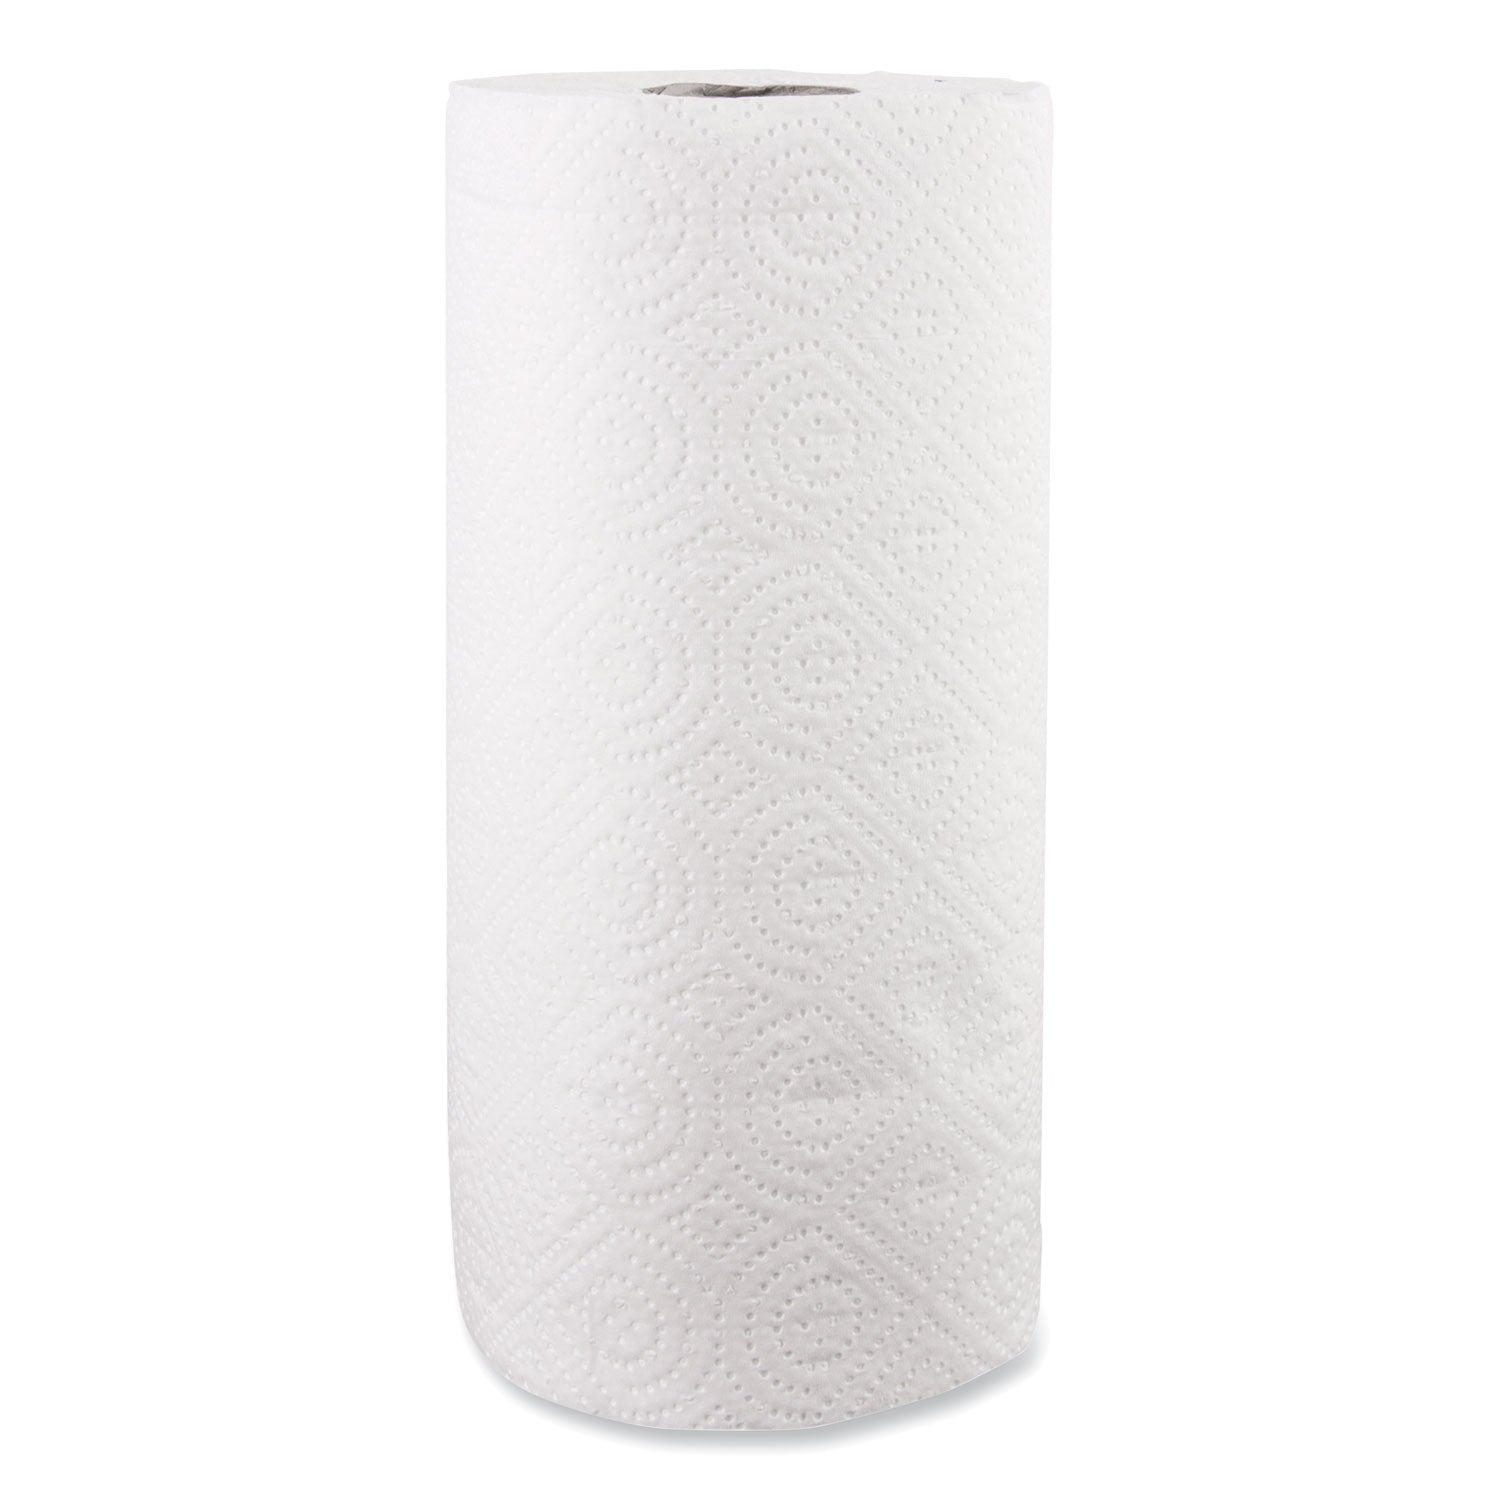 Kitchen Roll Towels, 2-Ply, 11 x 8.8, White, 100/Roll, 30 Rolls/Carton - 